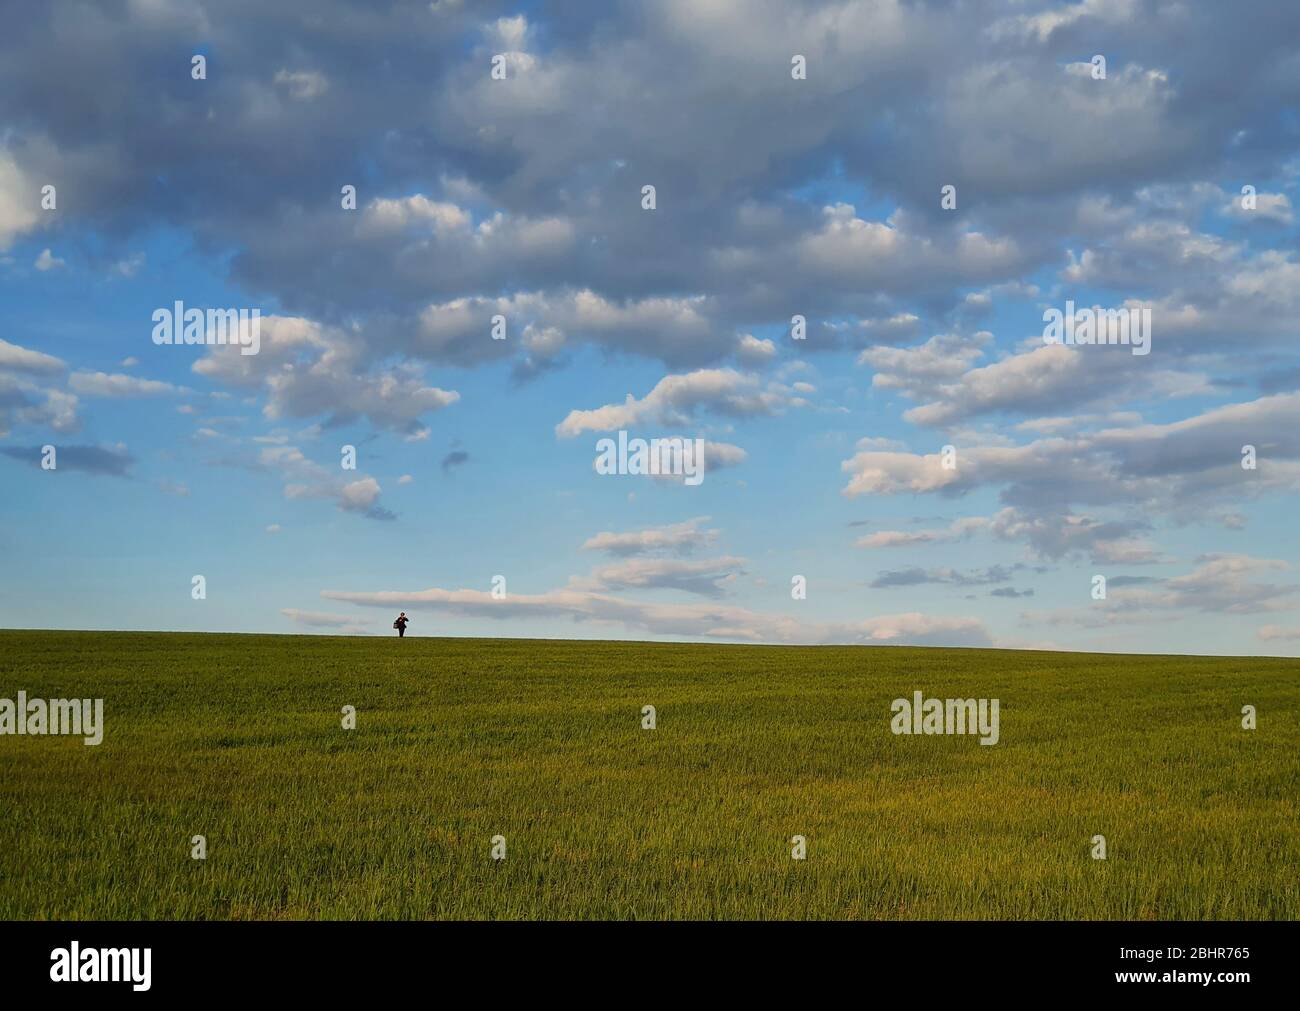 Tiny person silhouette on the horizon walking a green wheat field below a blue sky with fluffy clouds. Natural spring background, peaceful scene, idyl Stock Photo